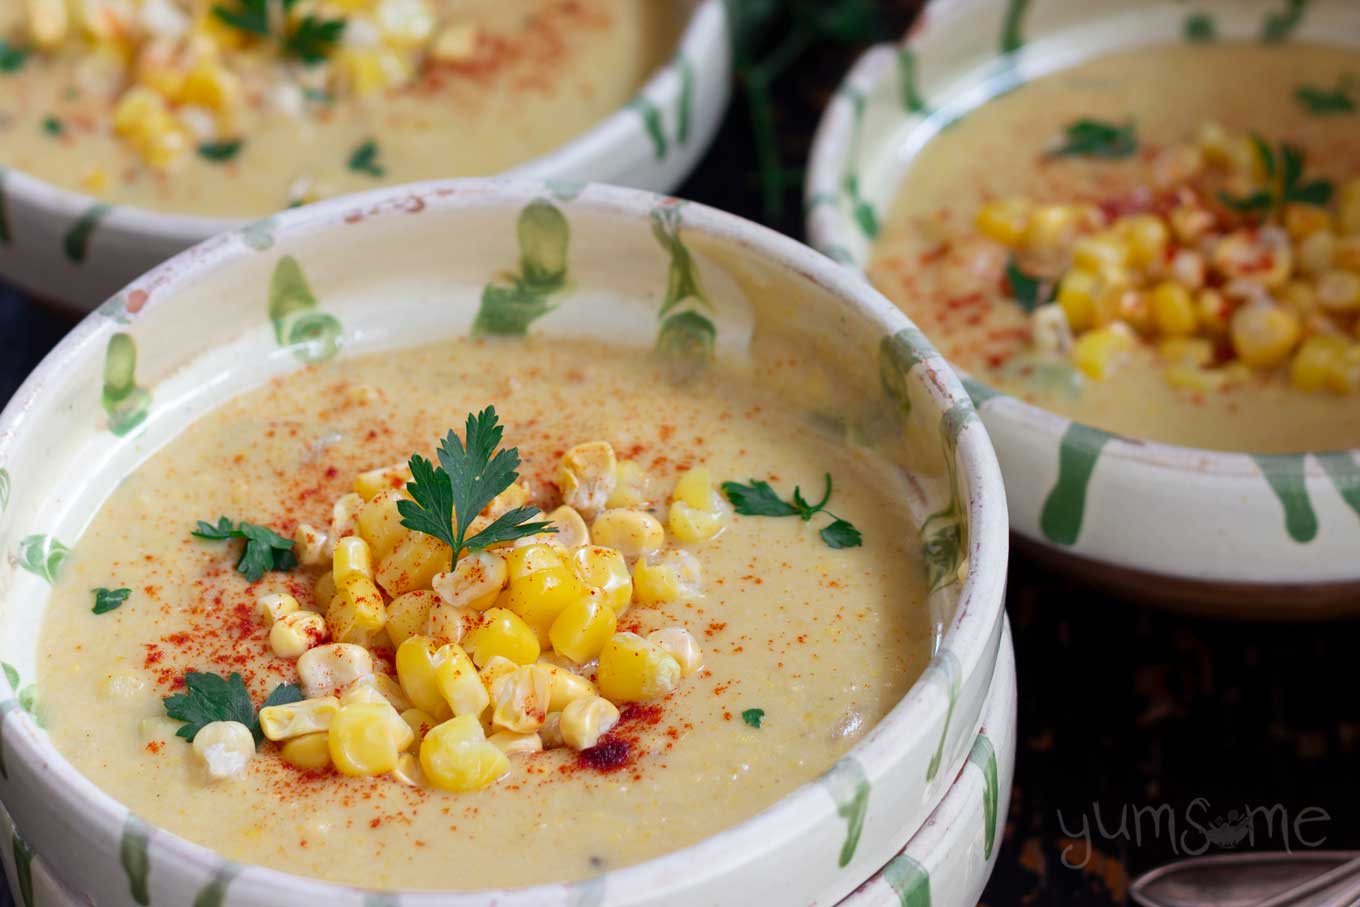 A cream and green bowl containing corn chowder, with extra corn on top.